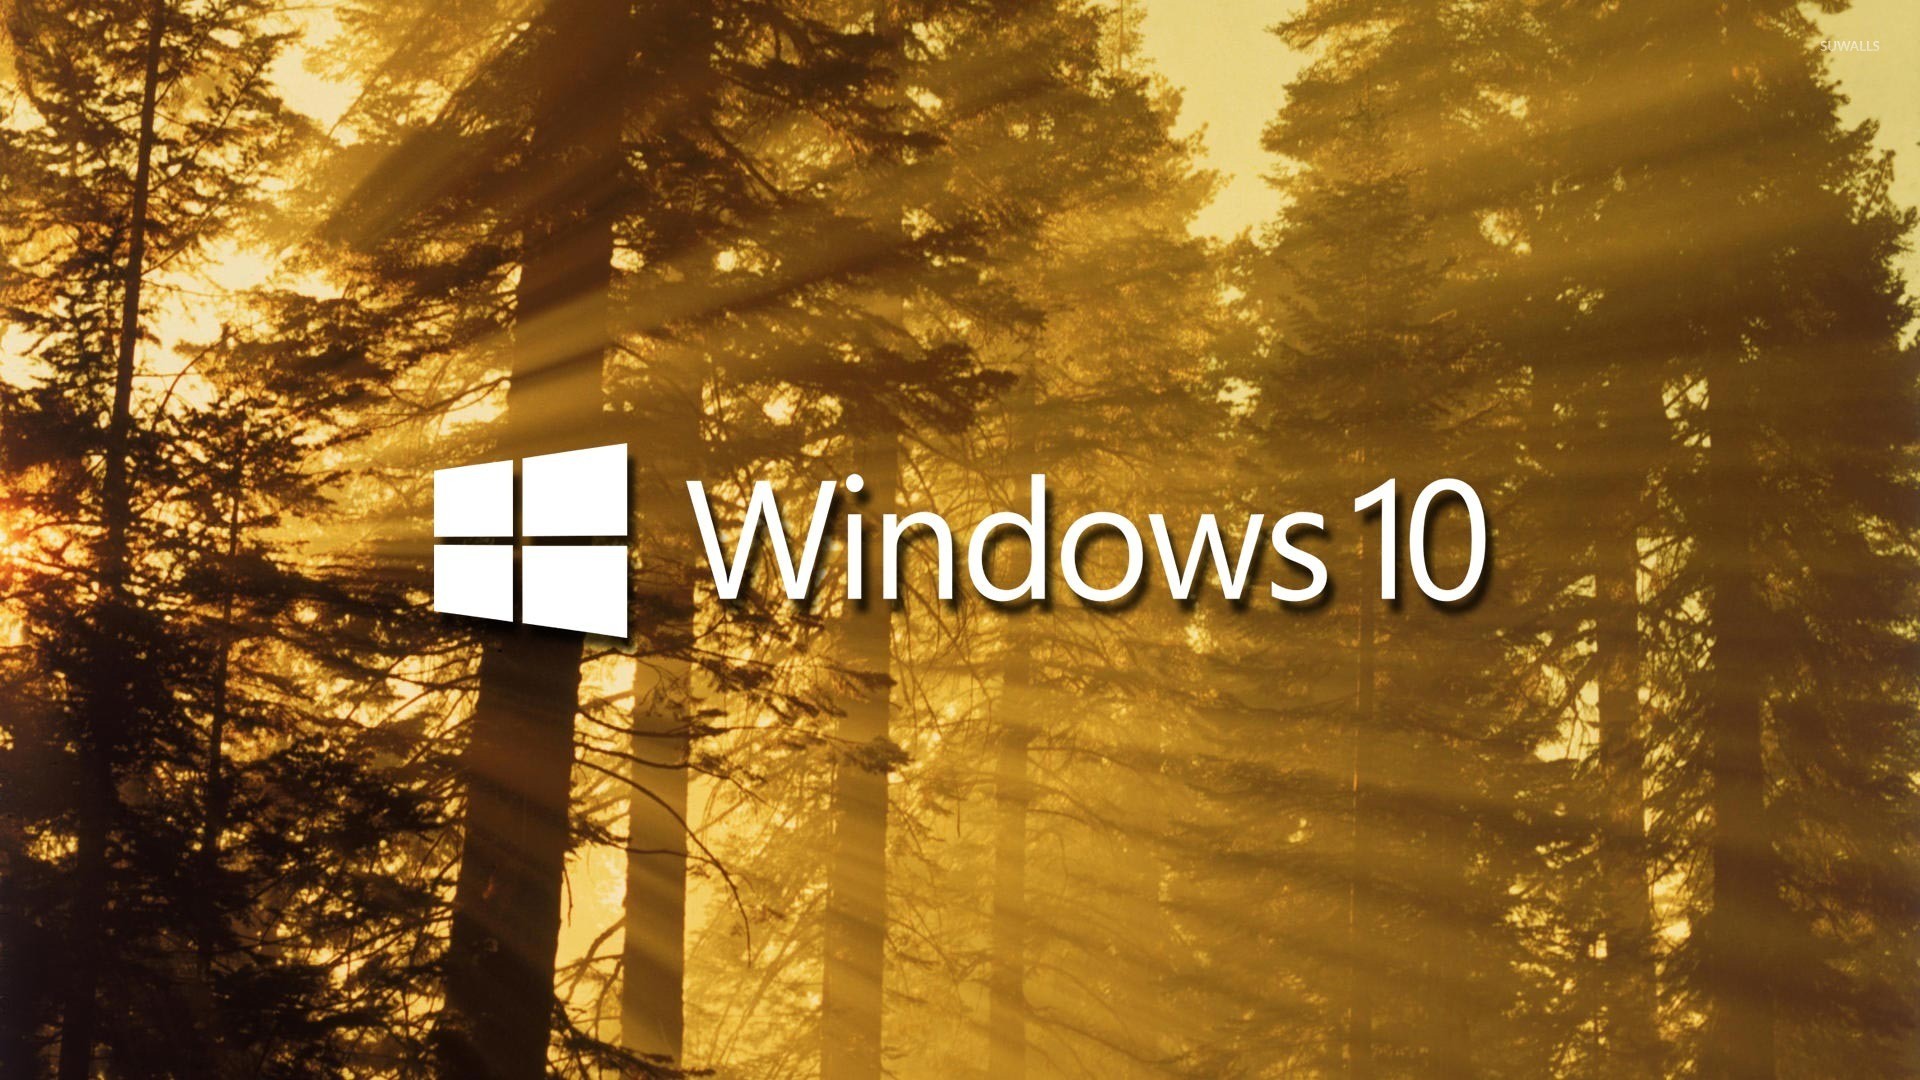 1920x1080 Windows 10 on sun rays in the forest text logo wallpaper  jpg